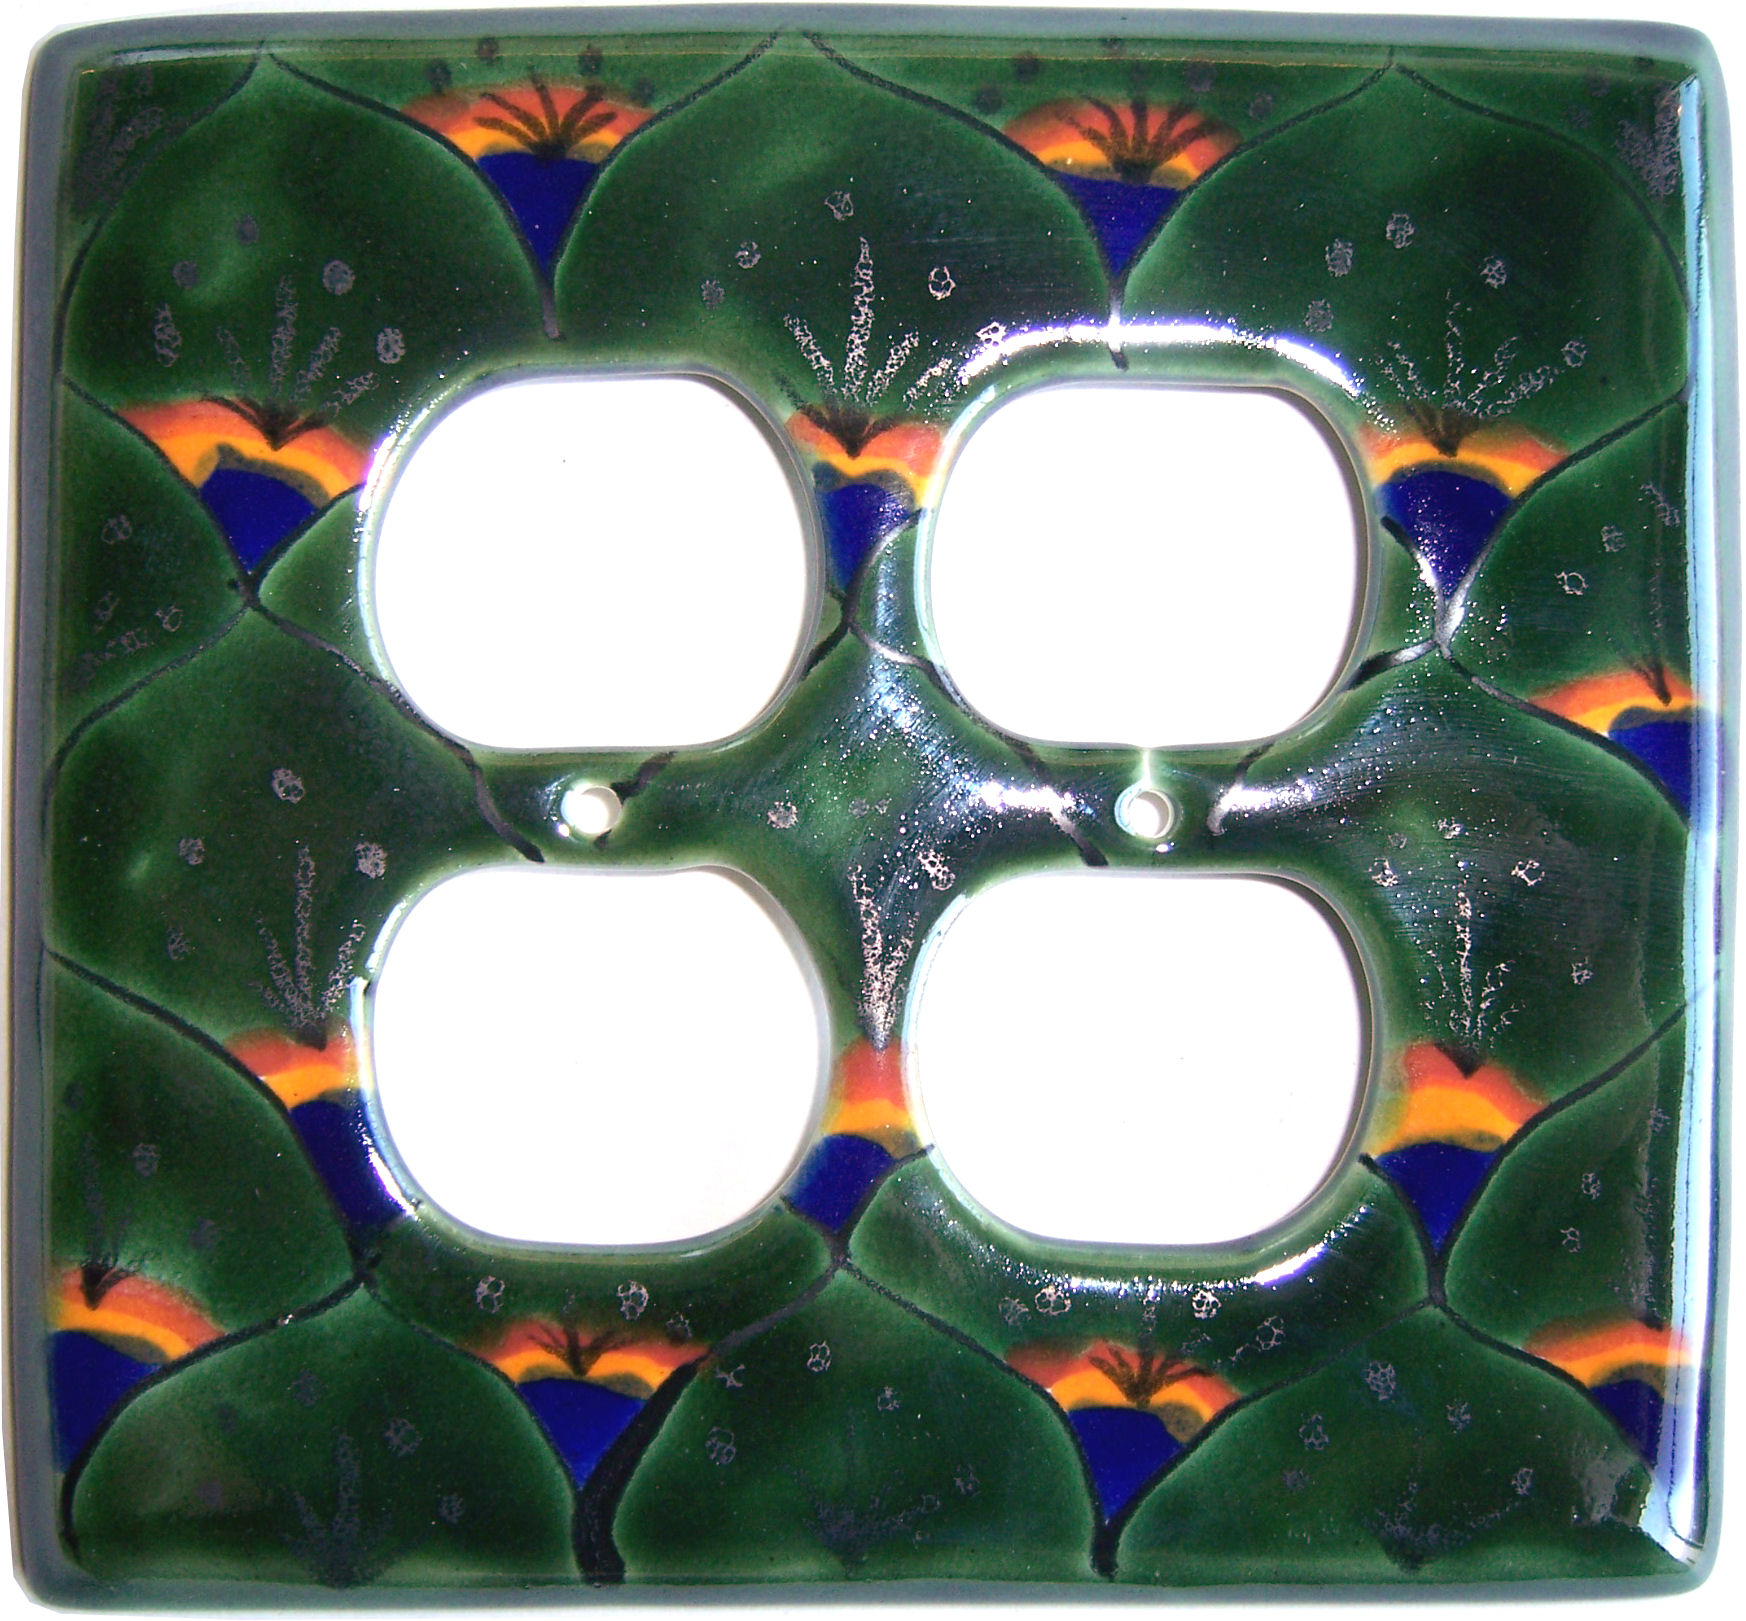 TalaMex Green Peacock Double Outlet Mexican Talavera Ceramic Switch Plate